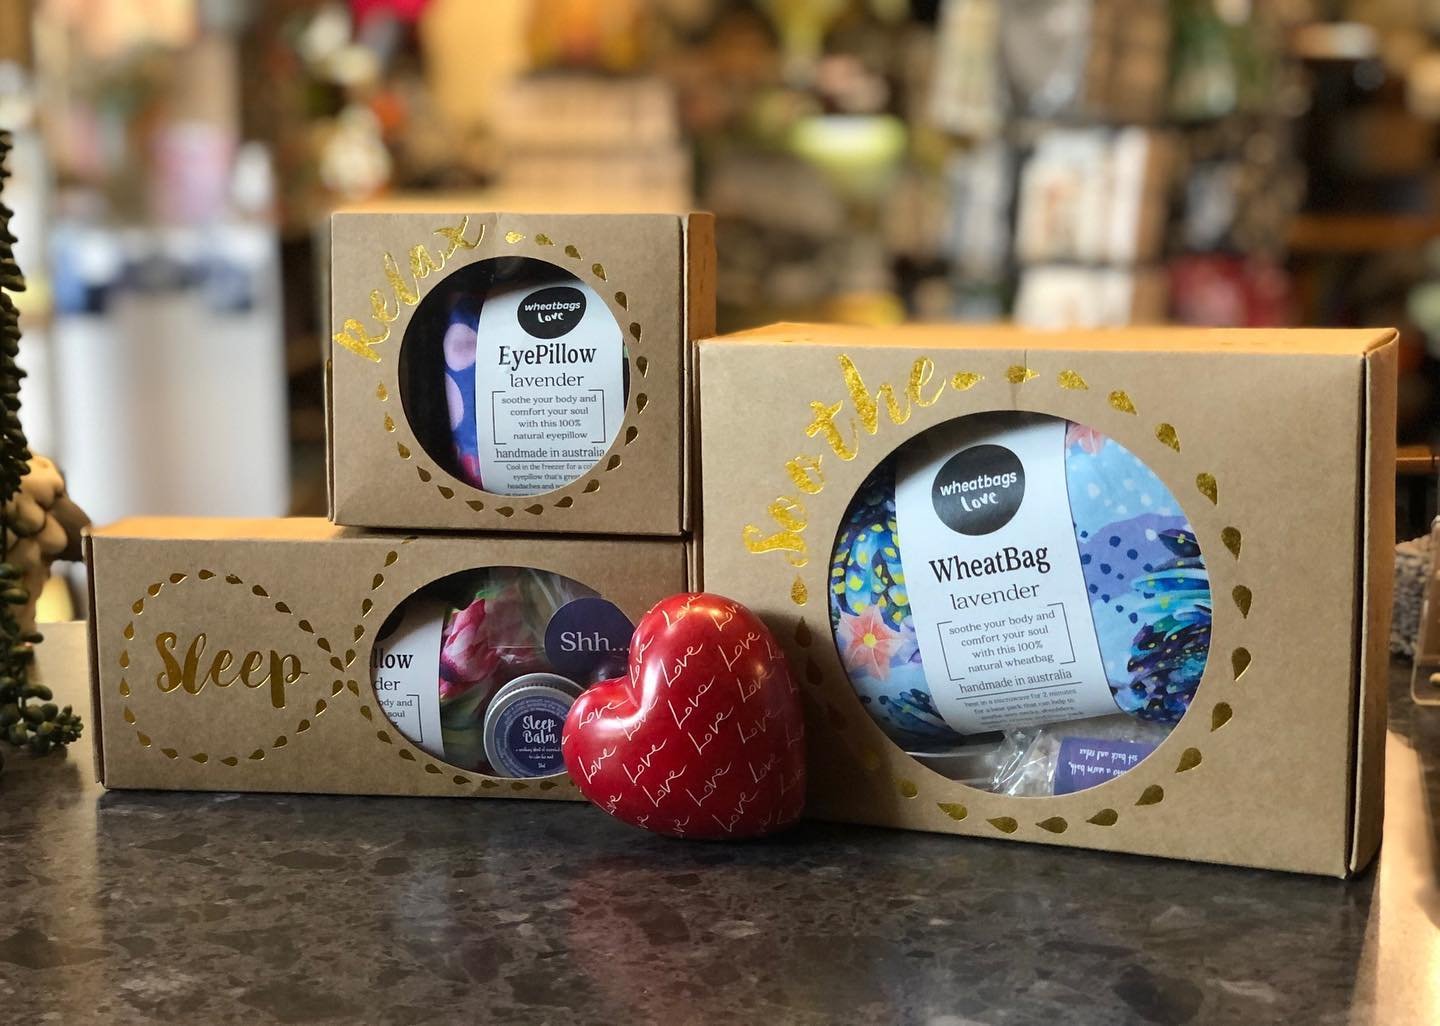 To mum, just what you need; Wheat packs with scented bath oil, sleep balm and ear plugs or epsom bath salts and sore muscle balm. 
Say less with this gift pack 😉 ❤️

#alburypictureframers #alburywodonga #alburycbd #alburygifts #mothersday #alburygif